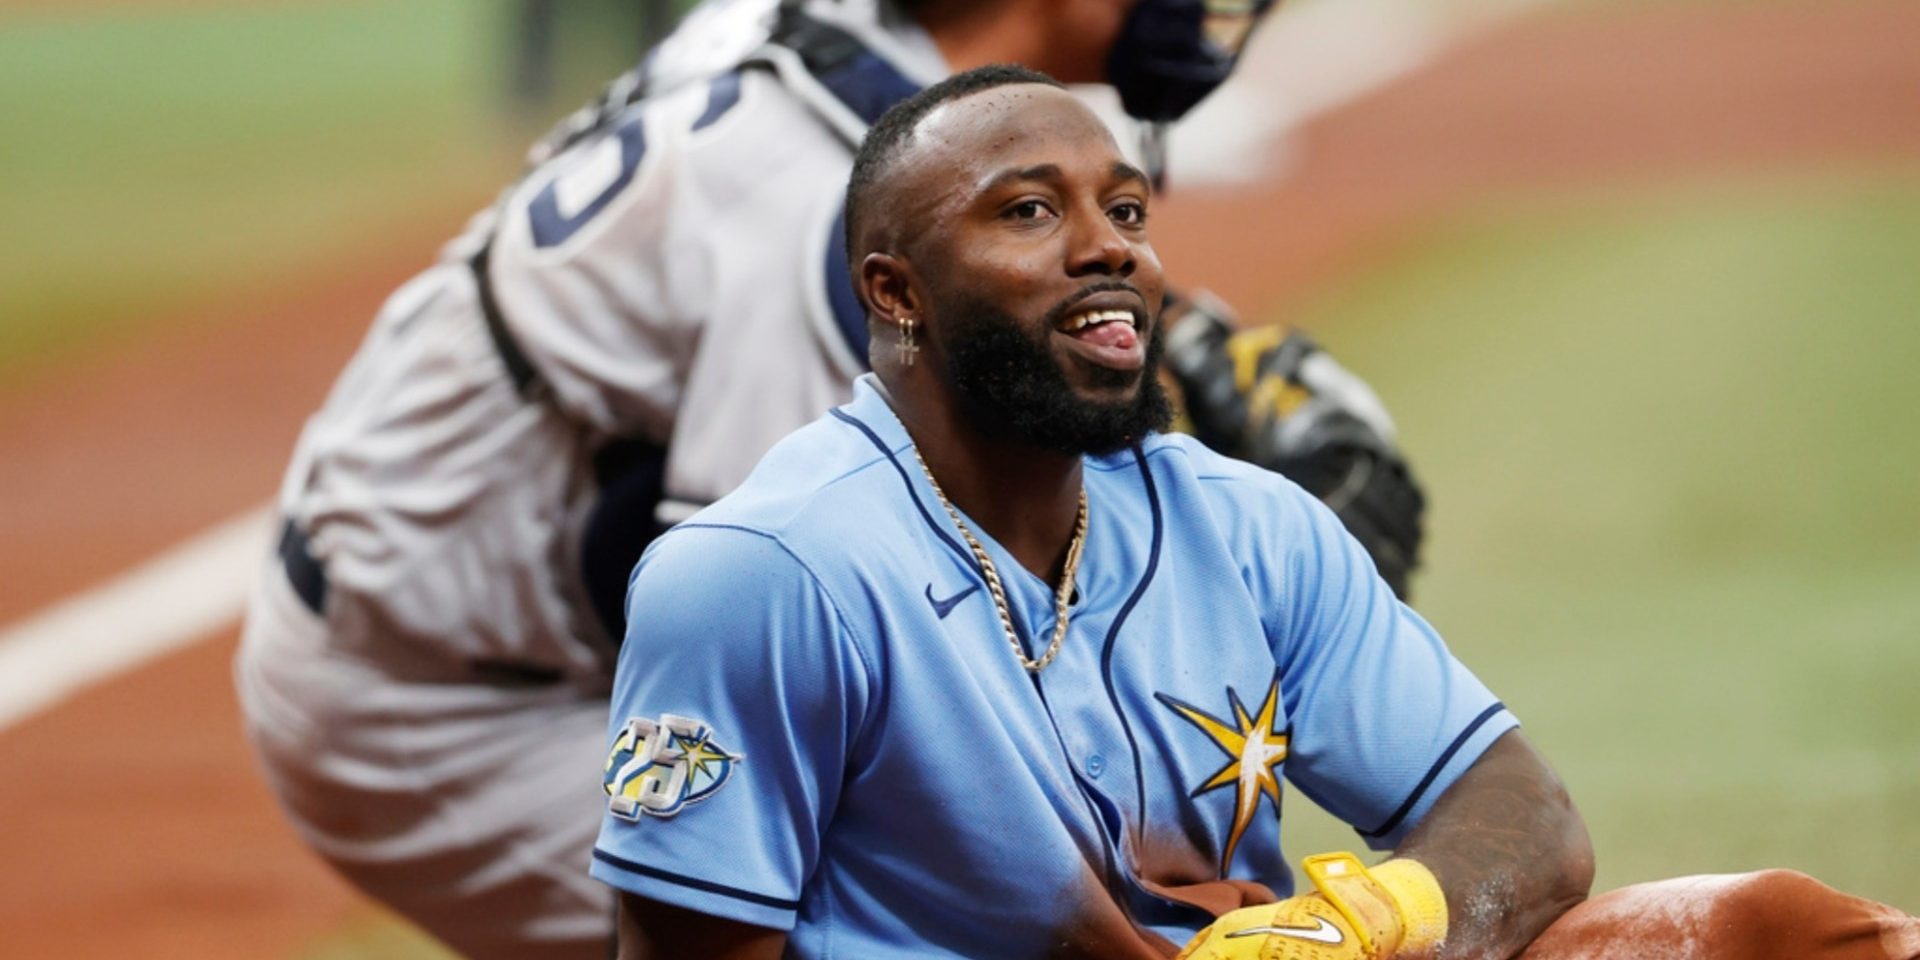 Tampa Bay Rays' Randy Arozarena reacts after scoring on a throwing error by New York Yankees center fielder Harrison Bader during the first inning a baseball game Sunday, Aug. 27, 2023, in St. Petersburg, Fla. (AP Photo/Scott Audette)